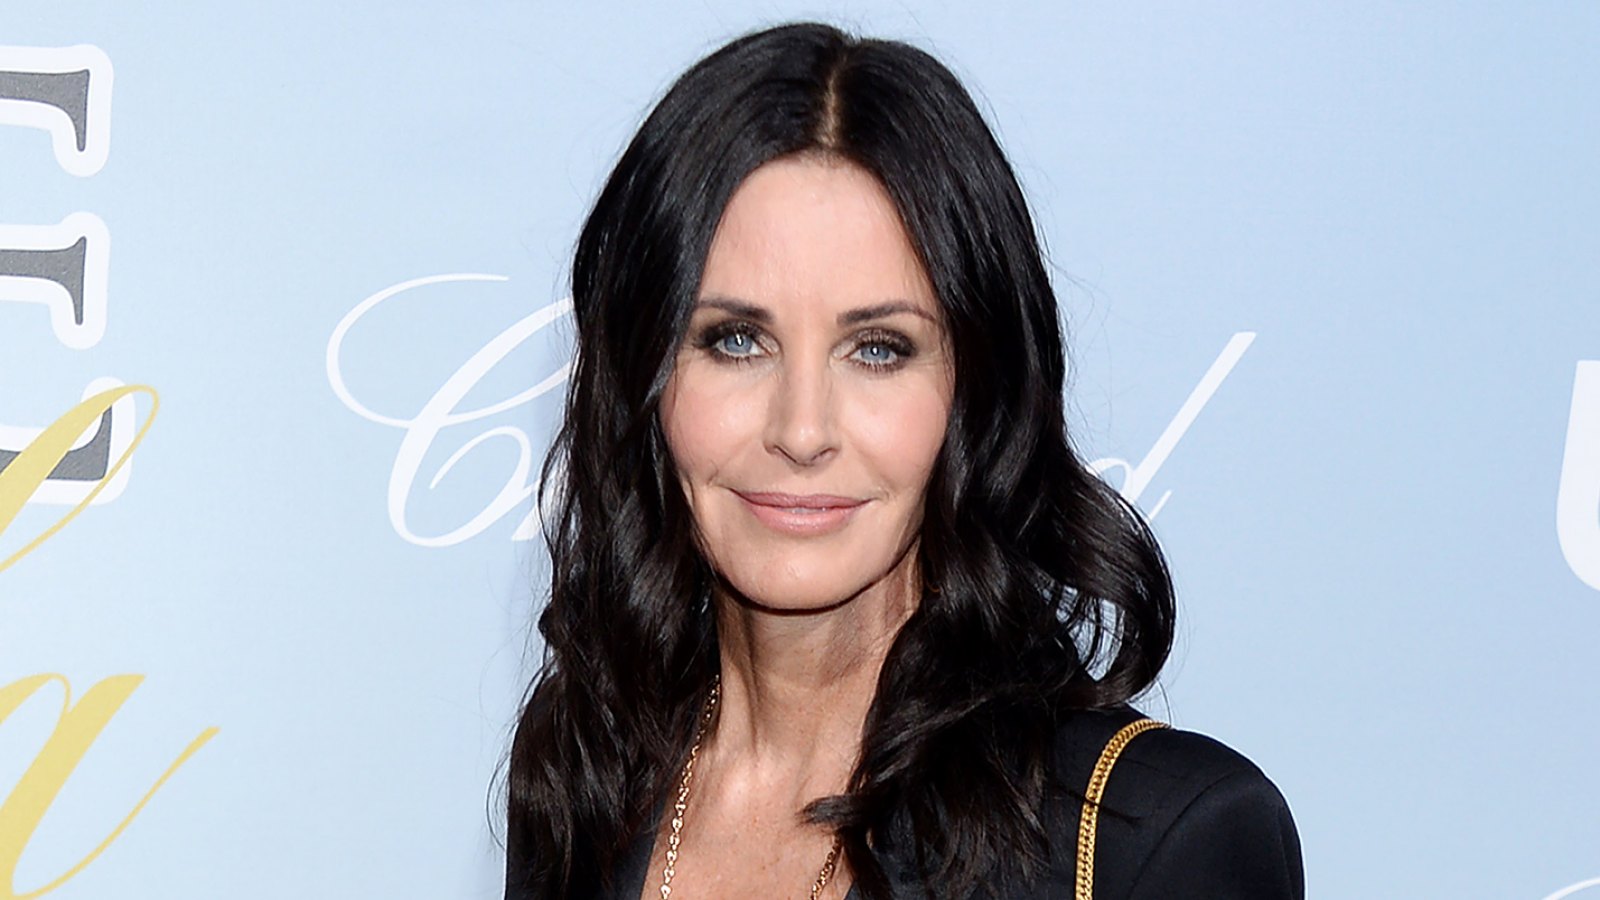 Courteney Cox Shares Her 5 Minute Makeup Routine